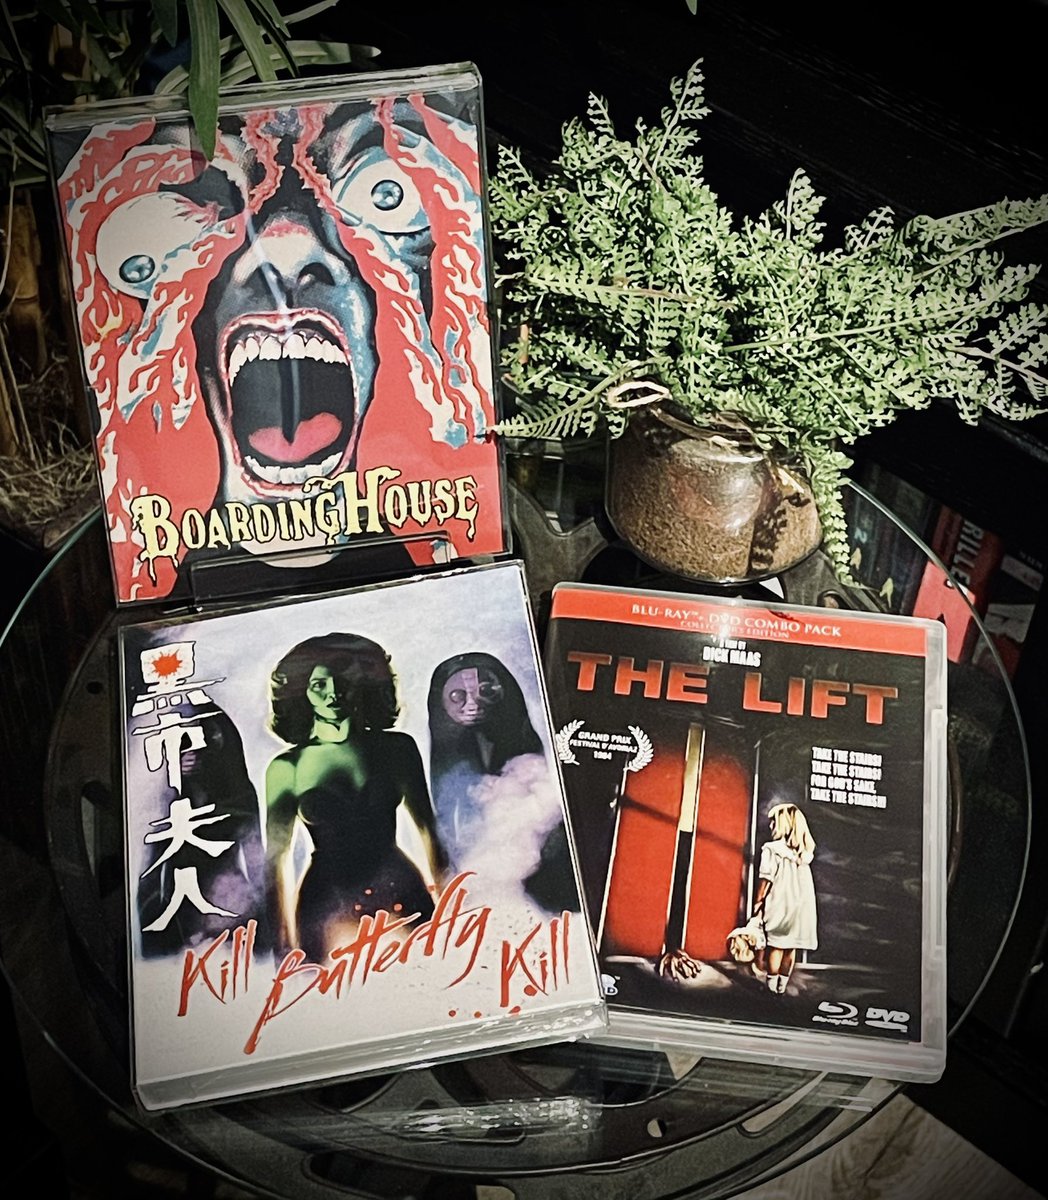 #FreshlySqueezed #LatestArrivals First ever SOV Boardinghouse comes courtesy @filmarchive, along w/ @diabolikdvd @CauldronFilms Kill Butterfly Kill, and @blunderground’s 2 Disc Combo The Lift. #physicalmedia